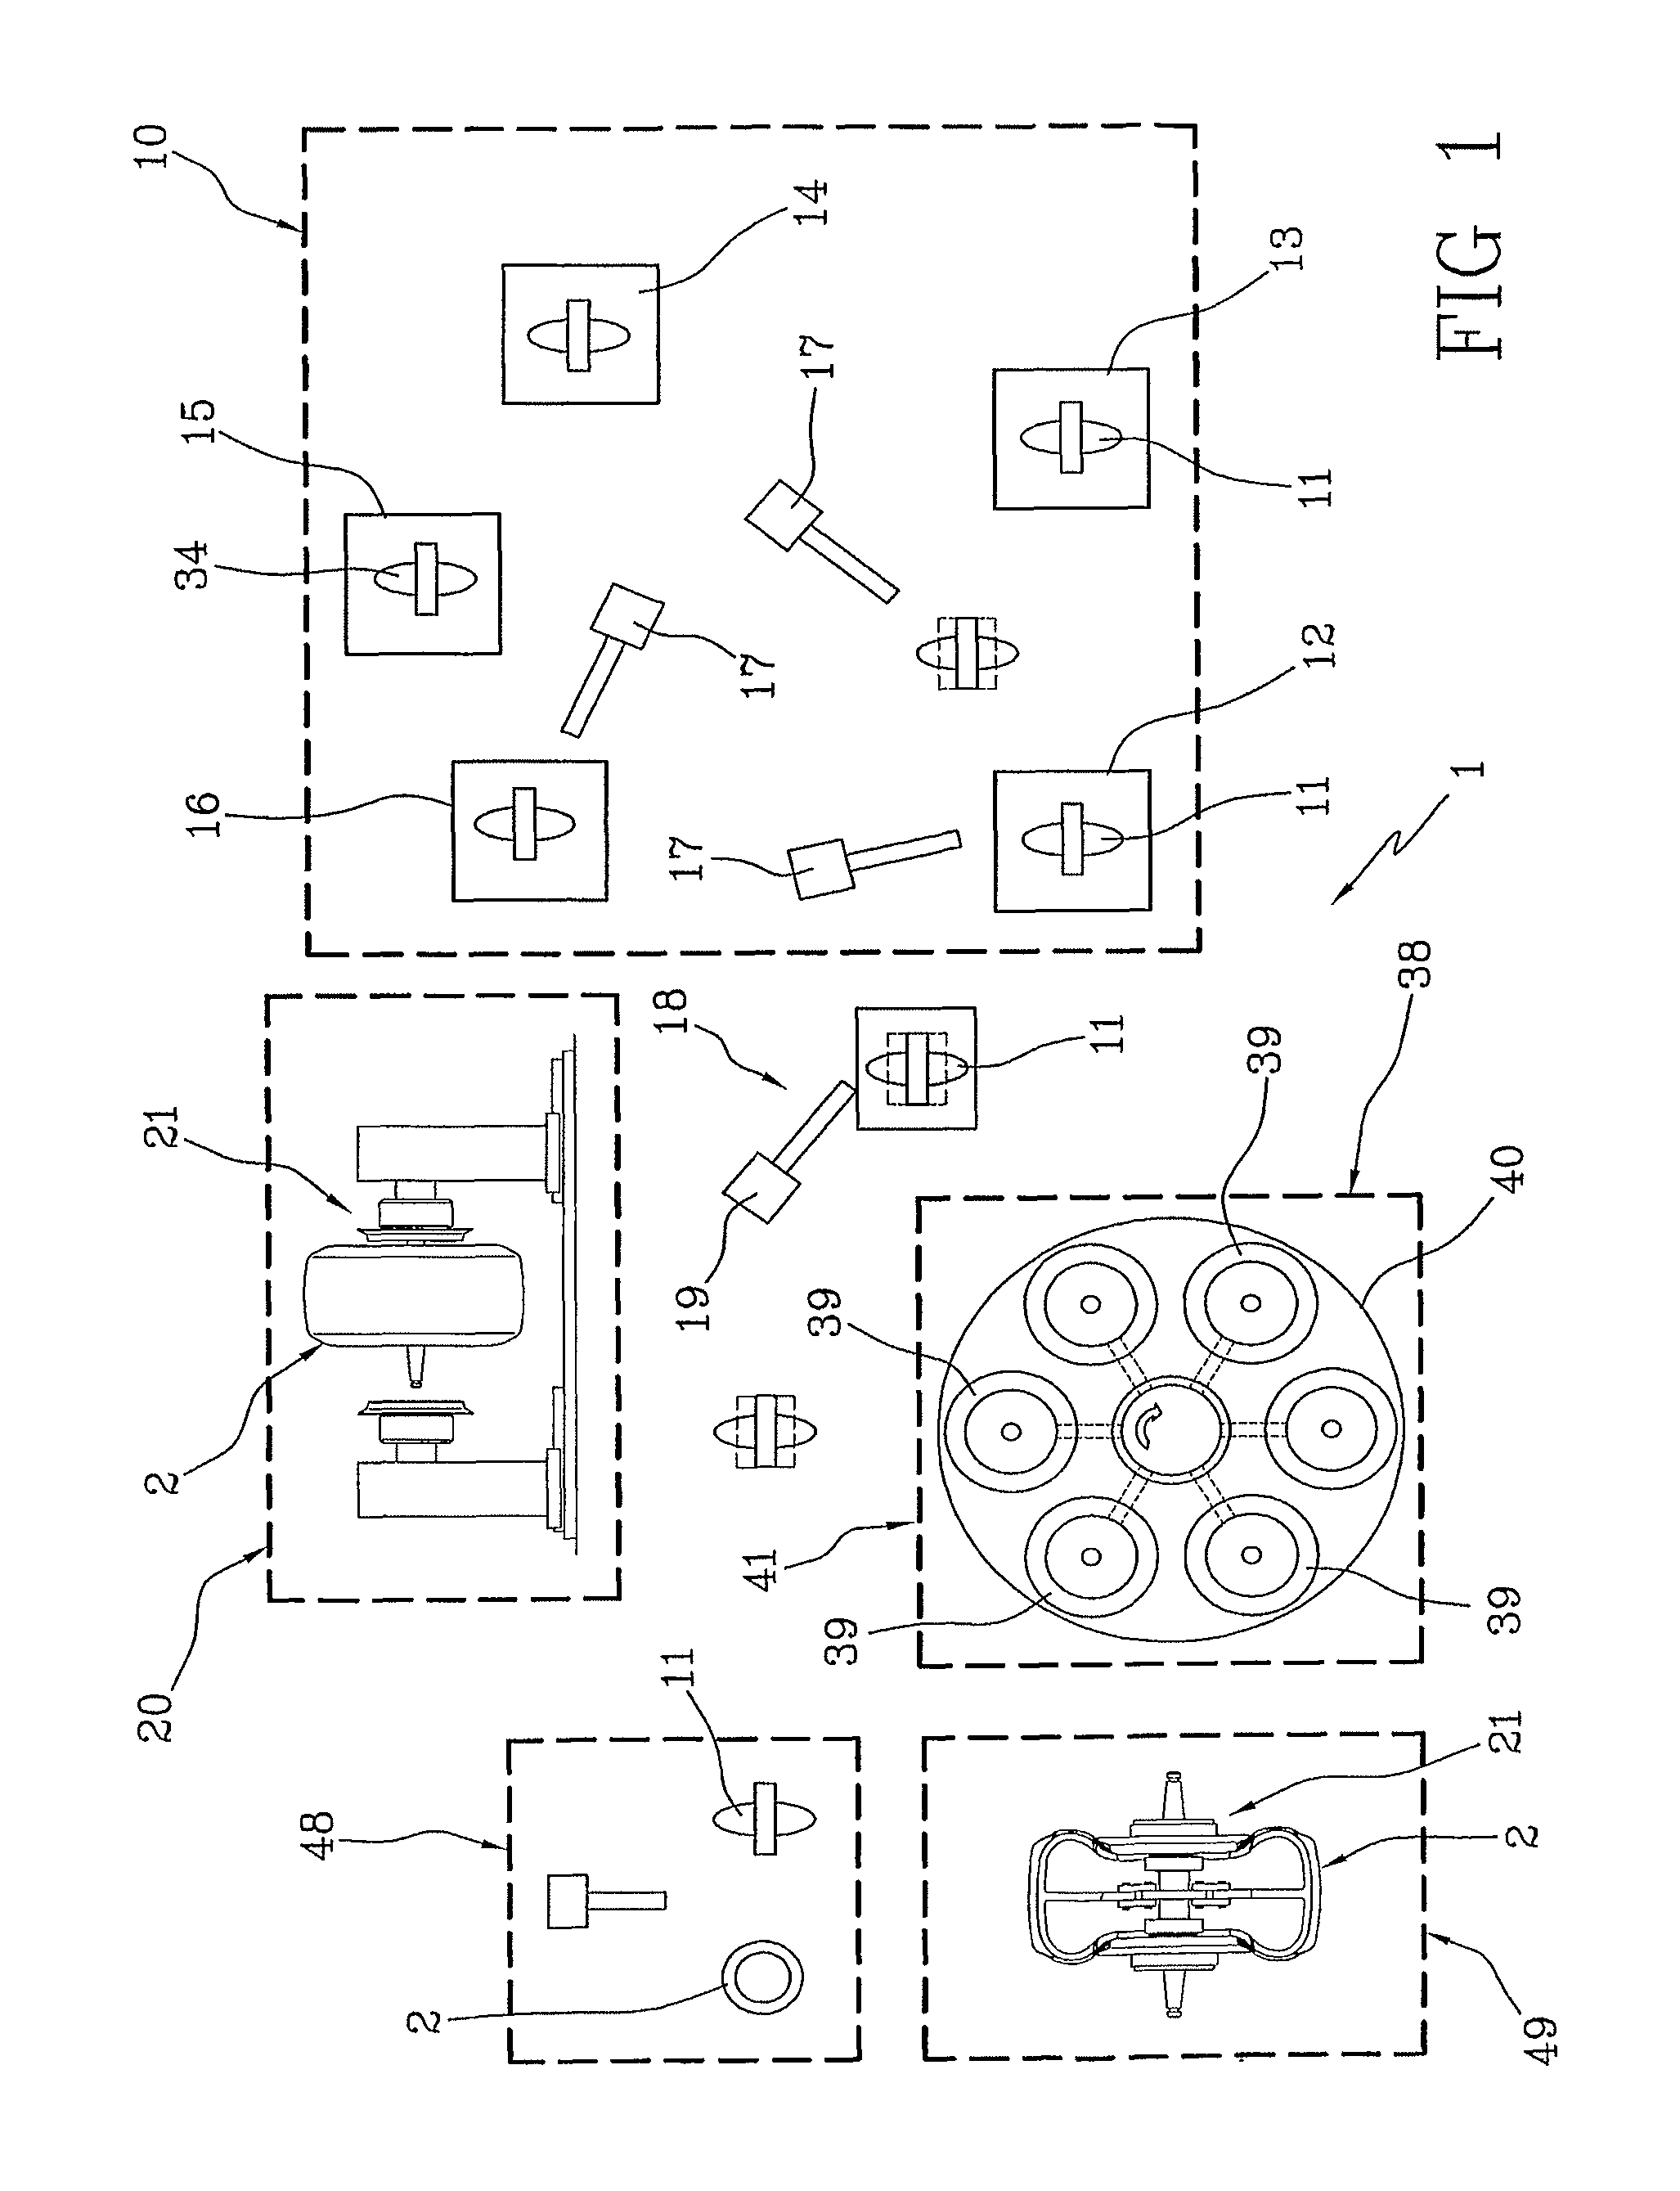 Apparatus for producing pneumatic tyres